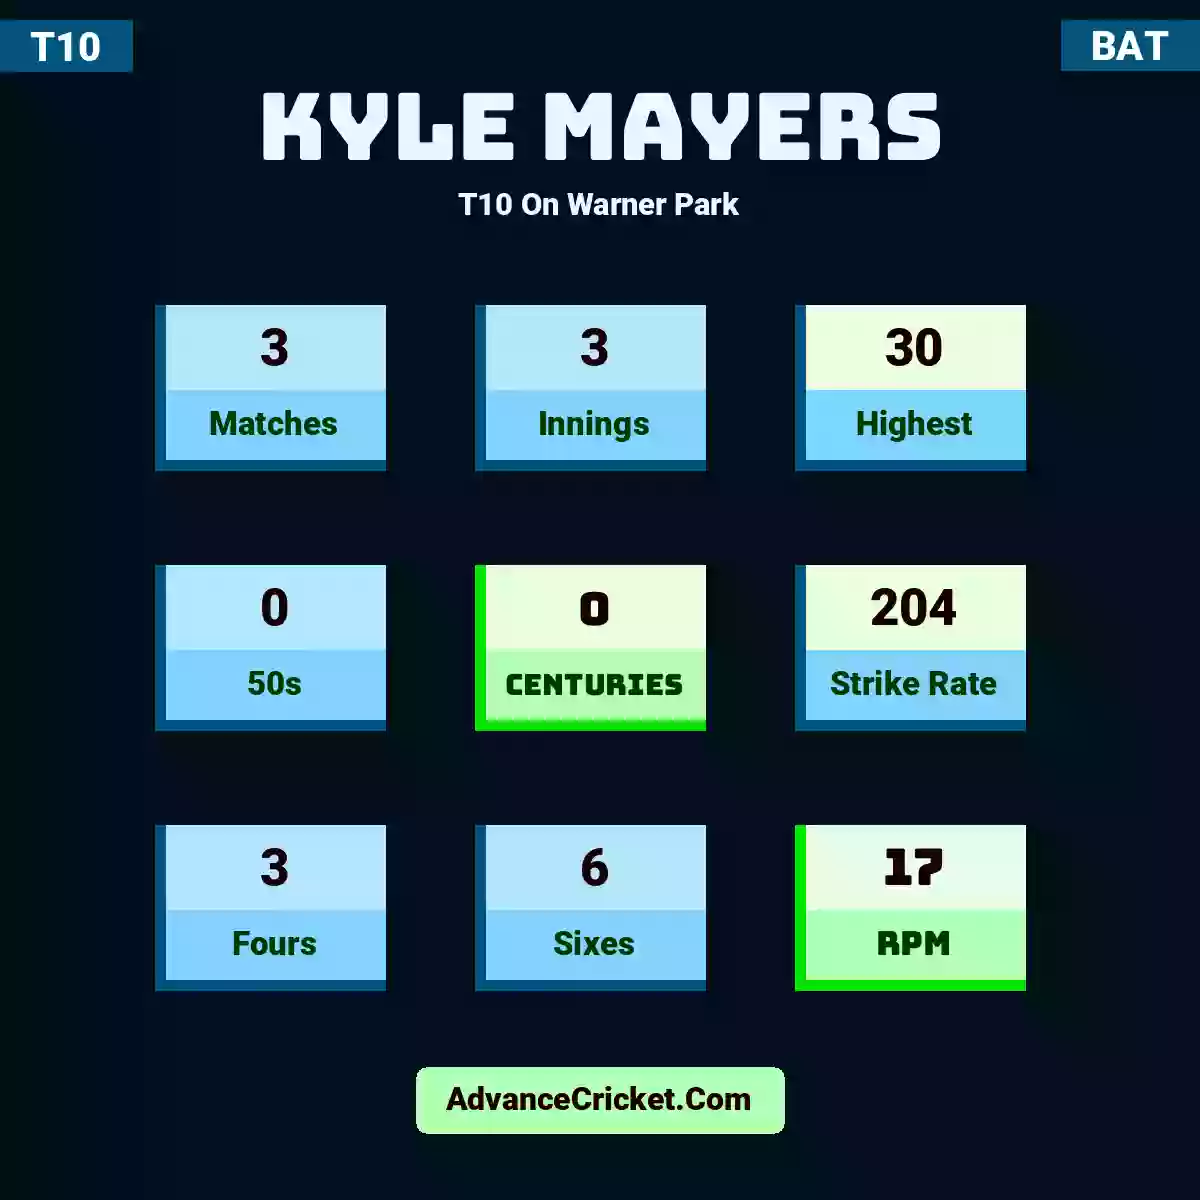 Kyle Mayers T10  On Warner Park, Kyle Mayers played 3 matches, scored 30 runs as highest, 0 half-centuries, and 0 centuries, with a strike rate of 204. K.Mayers hit 3 fours and 6 sixes, with an RPM of 17.